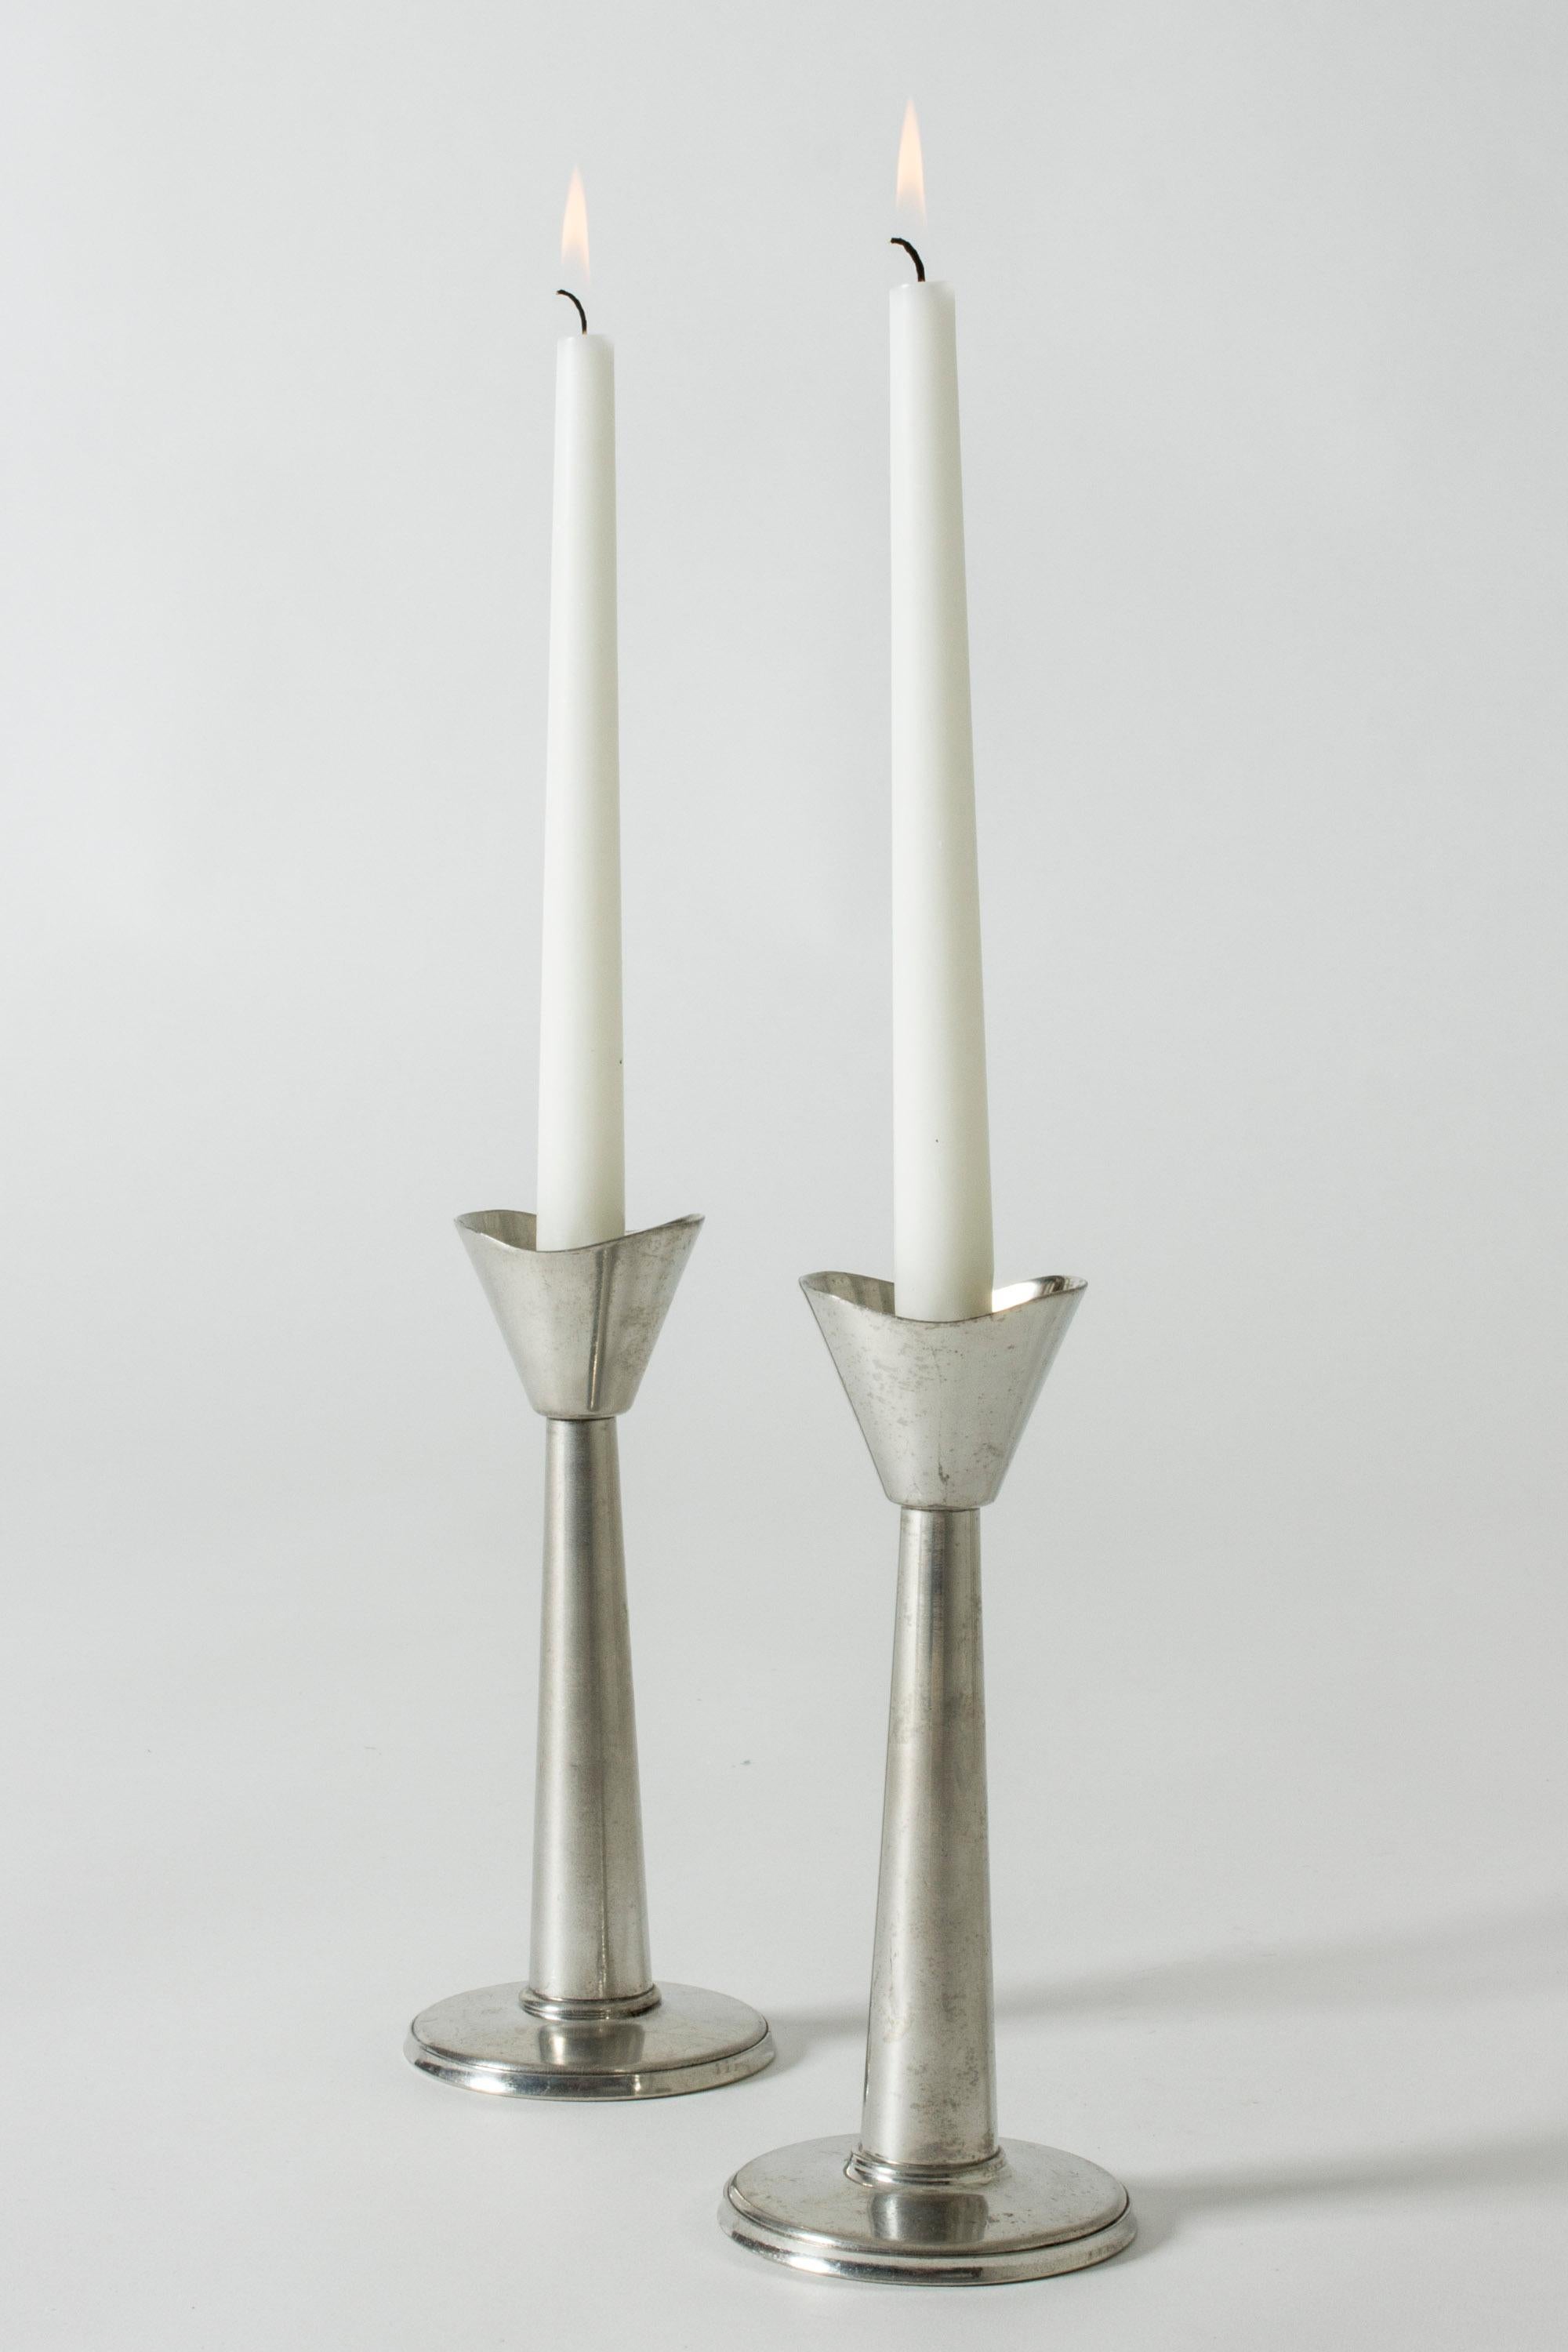 Pair of pewter candlesticks from GAB, in a sleek, functionalist design. Fit regular candles.